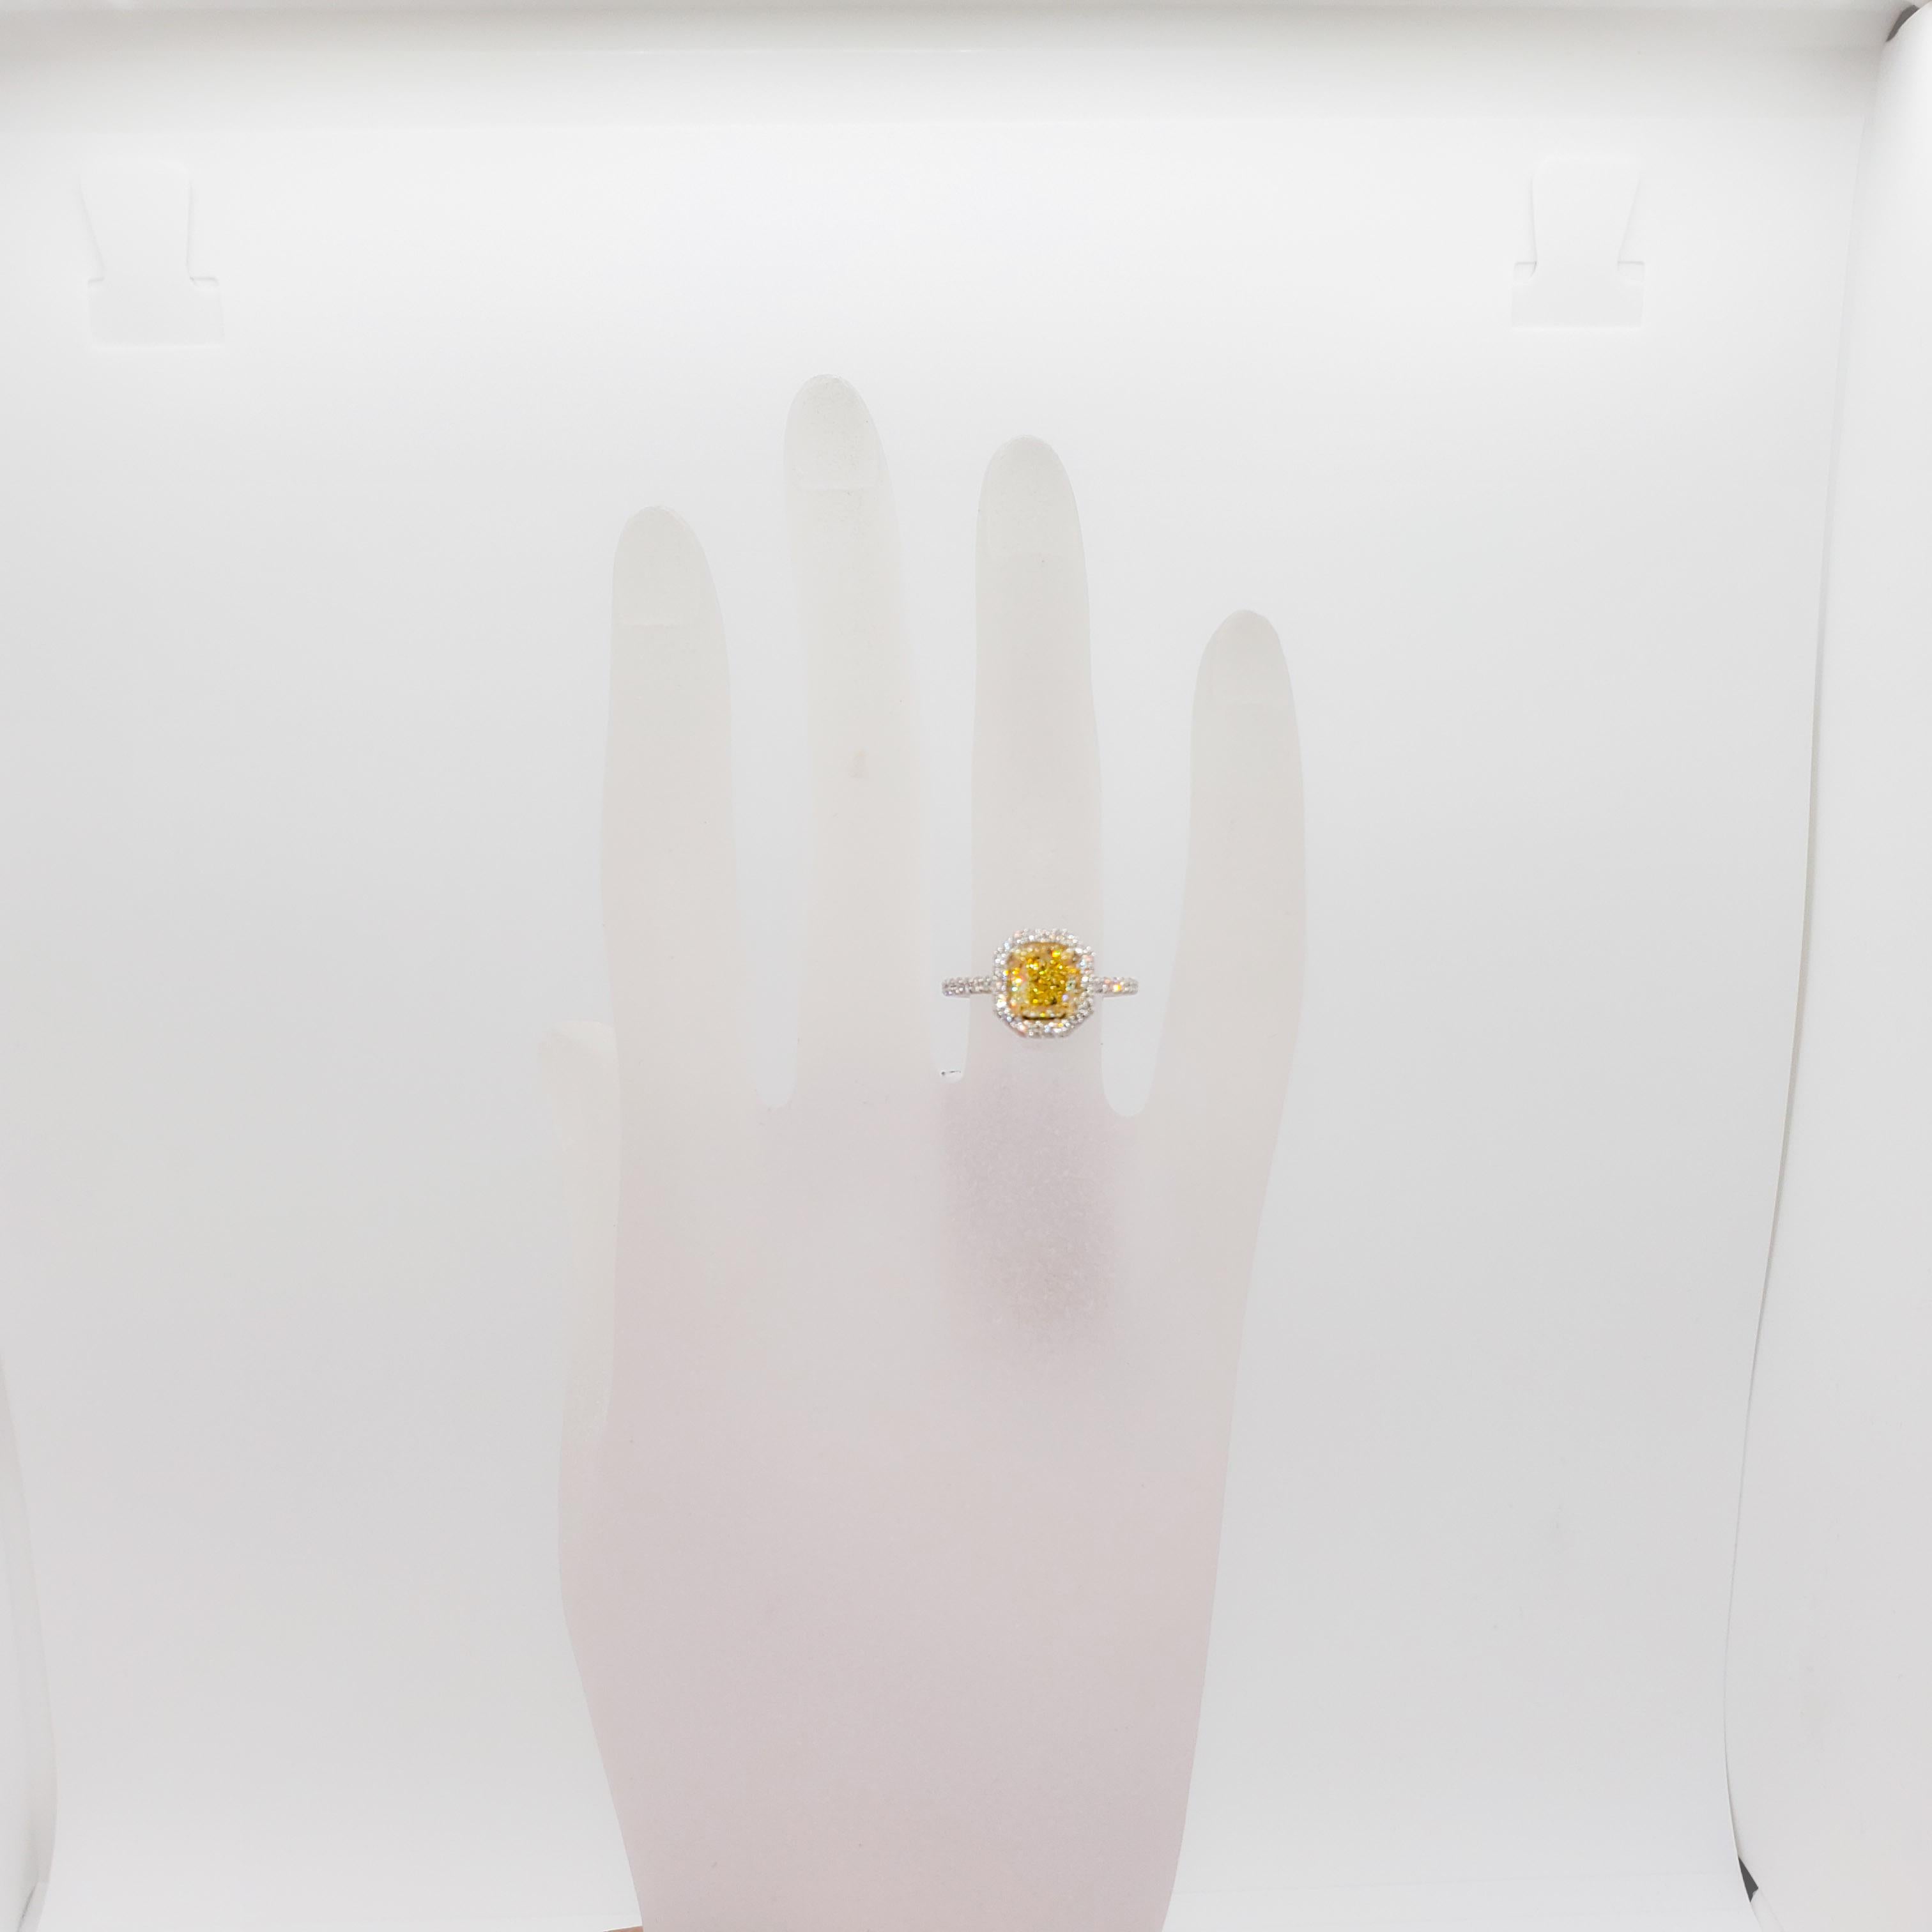 Stunning bright yellow fancy intense radiant diamond weighing 1.61 ct. with 0.35 ct. of good quality white diamond rounds.  Yellow diamond is a VVS2 stone and the perfect sunshine yellow.  Handmade platinum and 18k yellow gold mounting.  Ring size